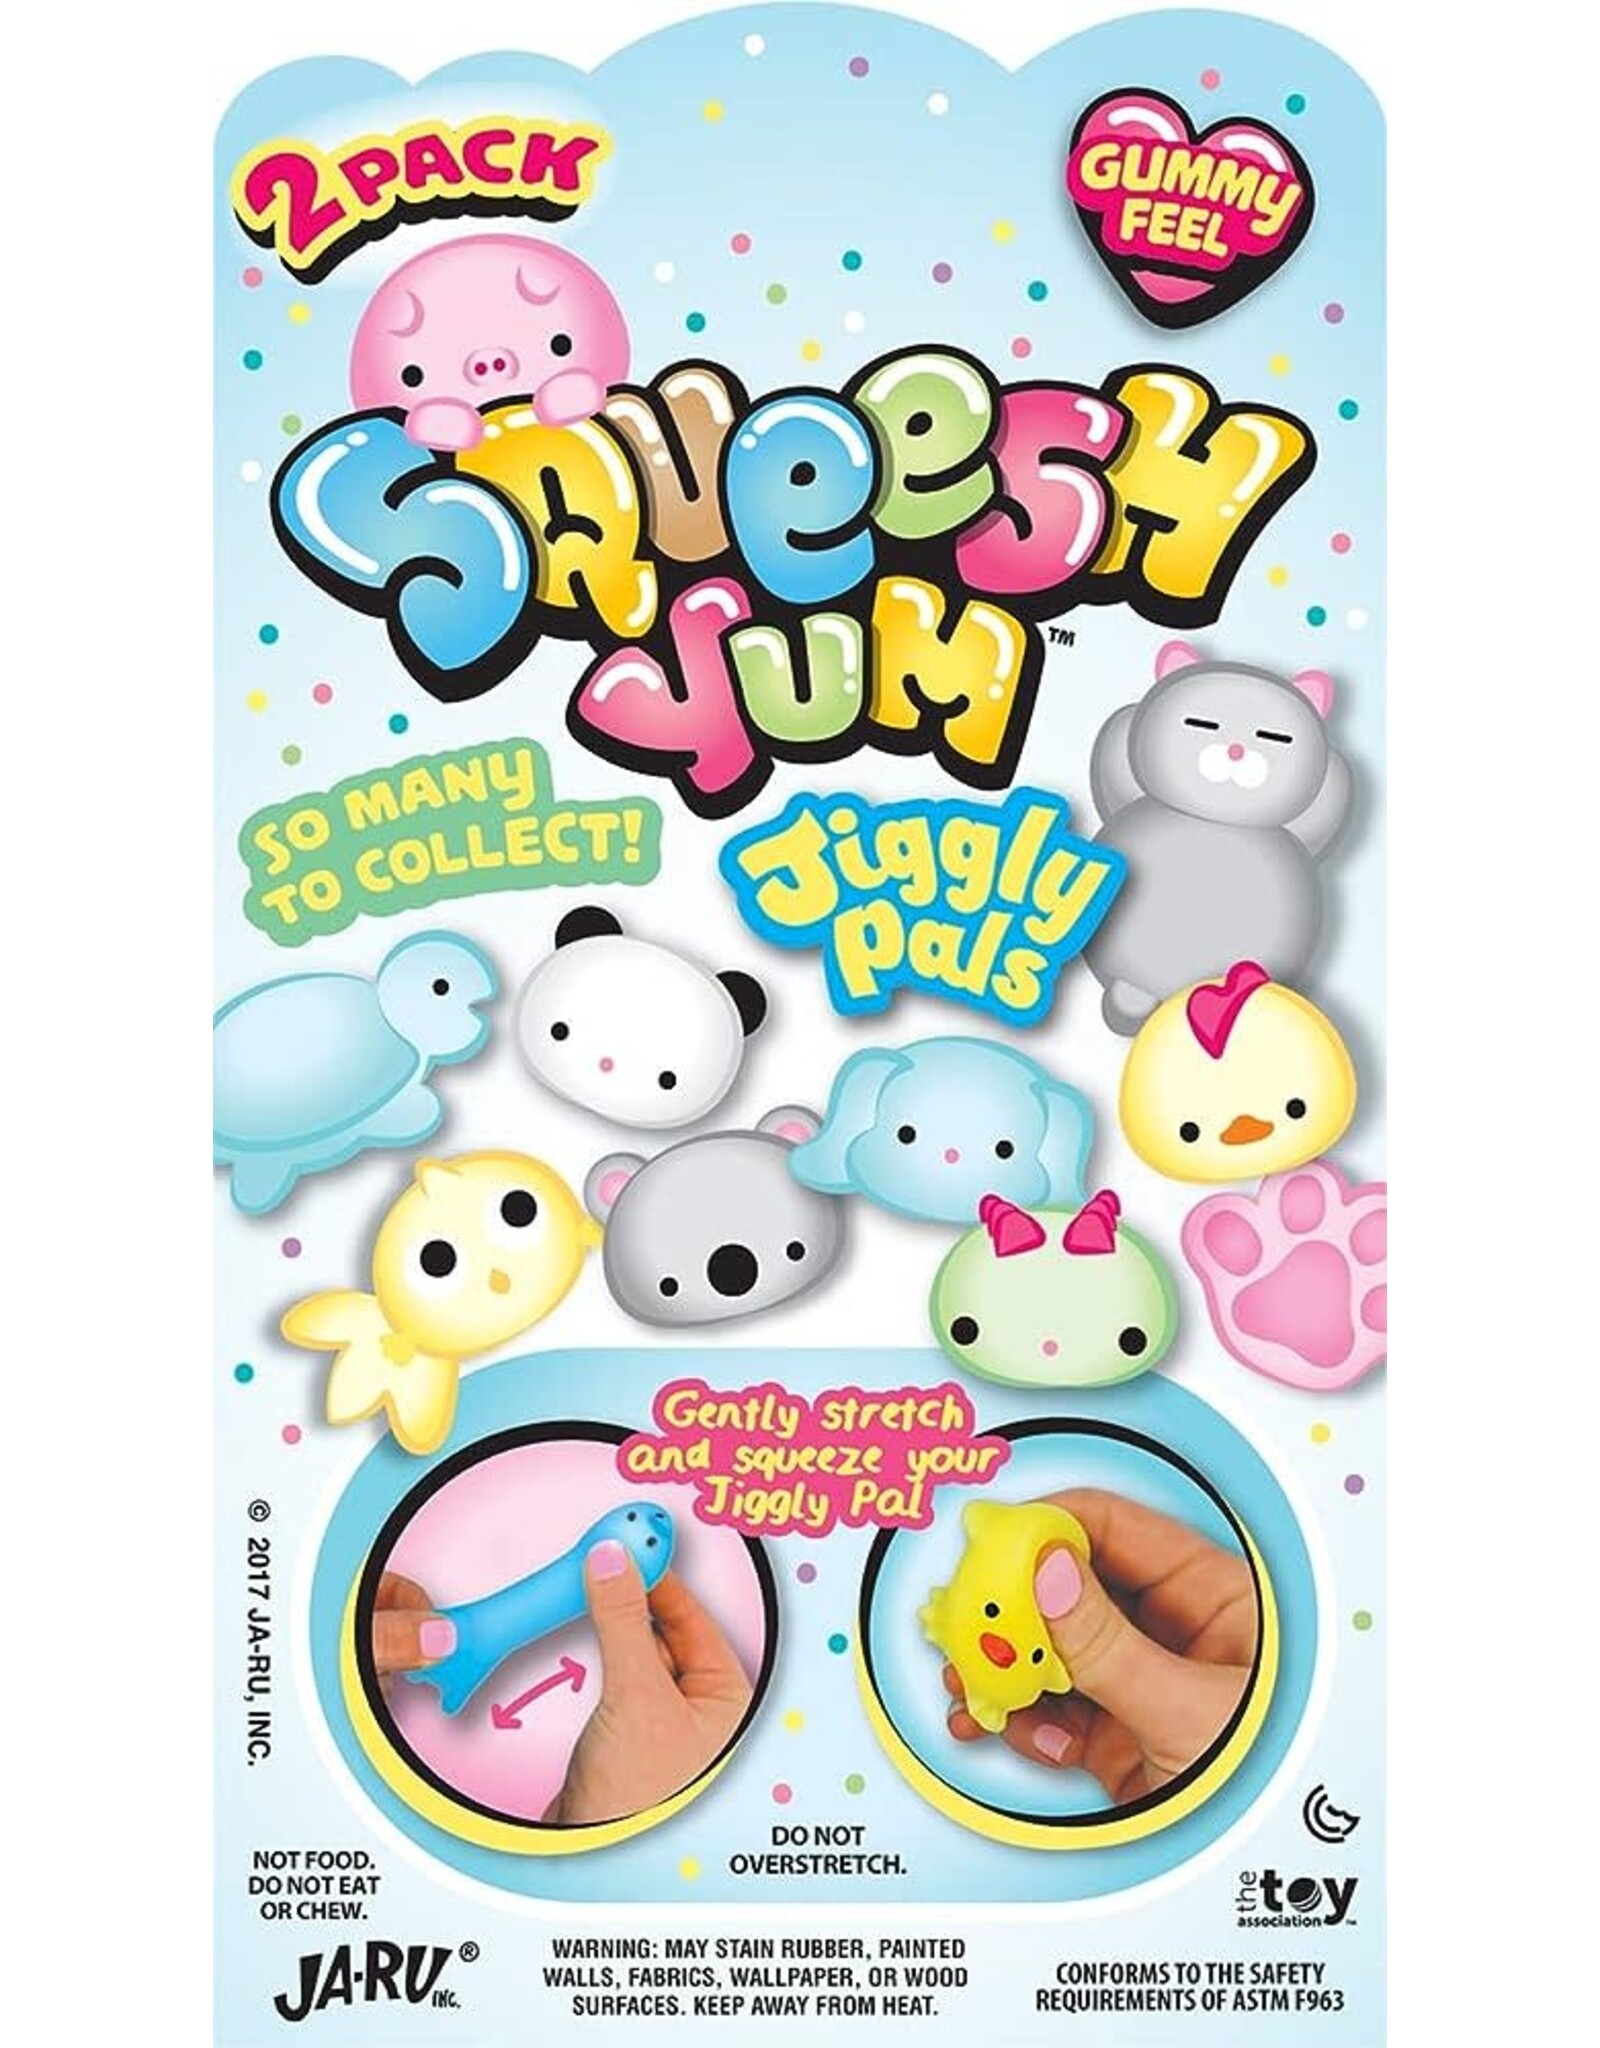 Squeesh Yum Jiggly Pals 2 Pack